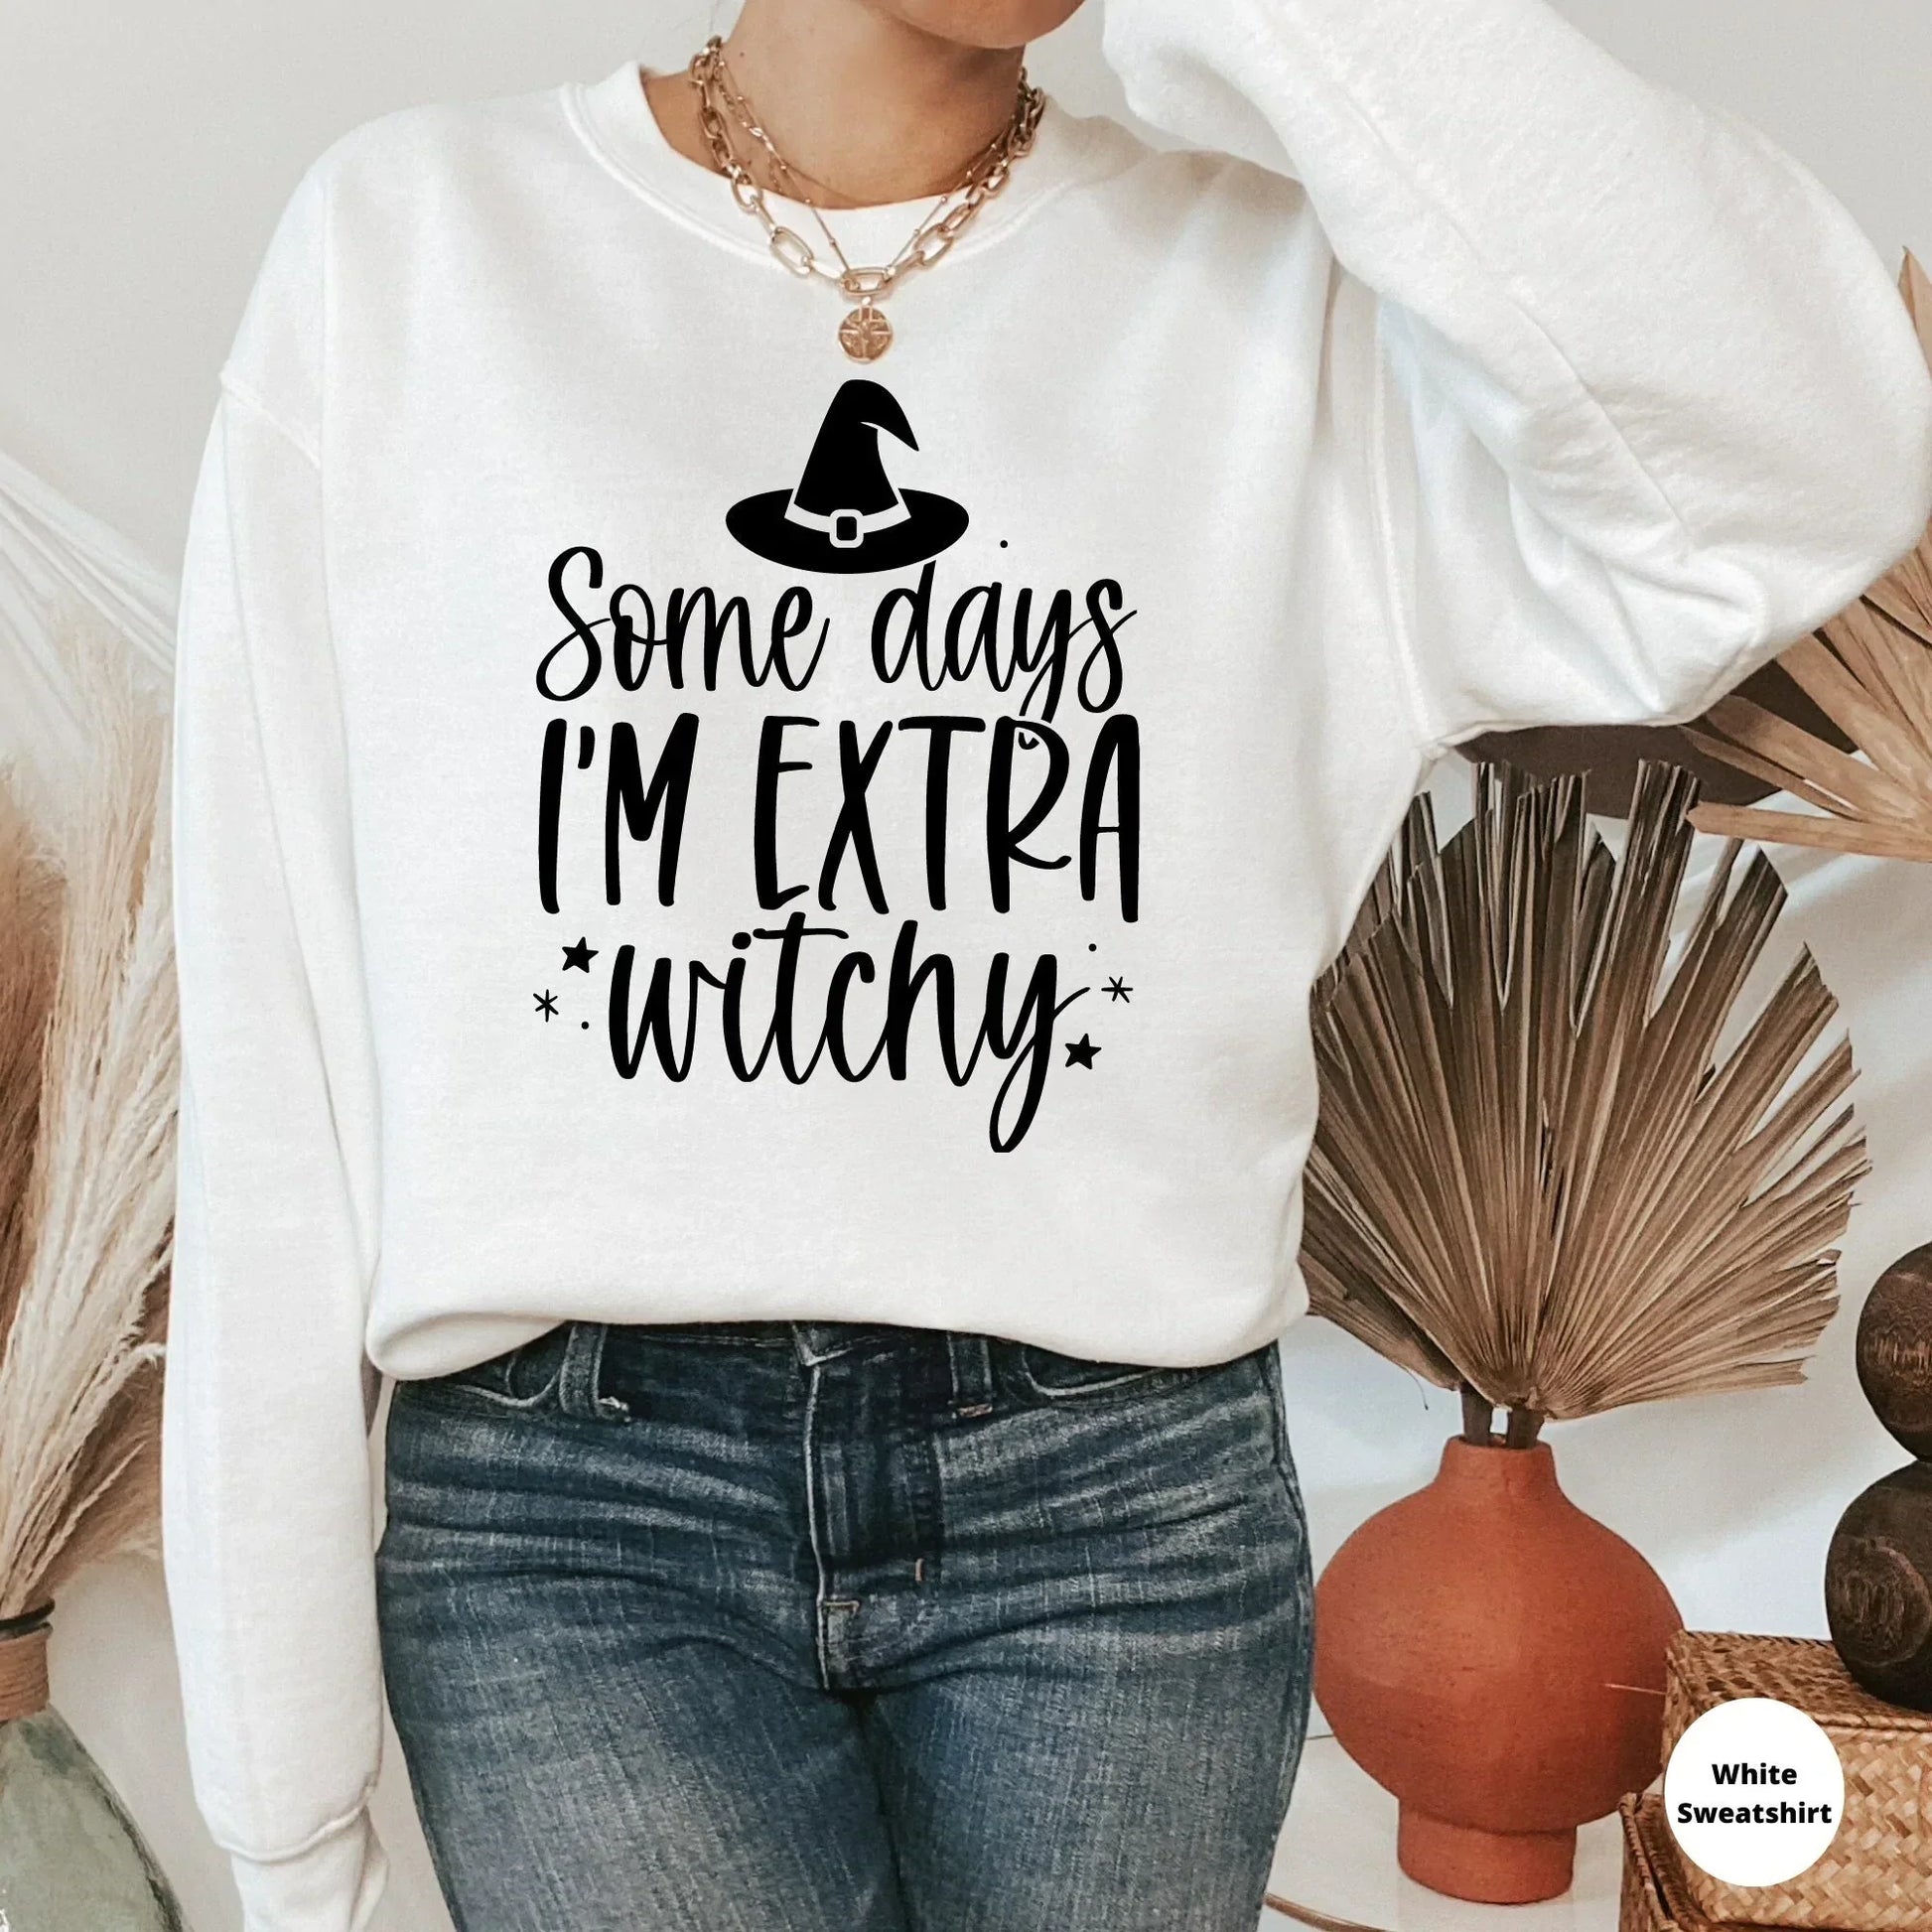 Halloween Sweater, Extra Witchy Somedays, Witch Shirt, Halloween Crewneck, Funny Halloween Party, Cute Halloween Hoodie, Halloween Cat Shirt HMDesignStudioUS